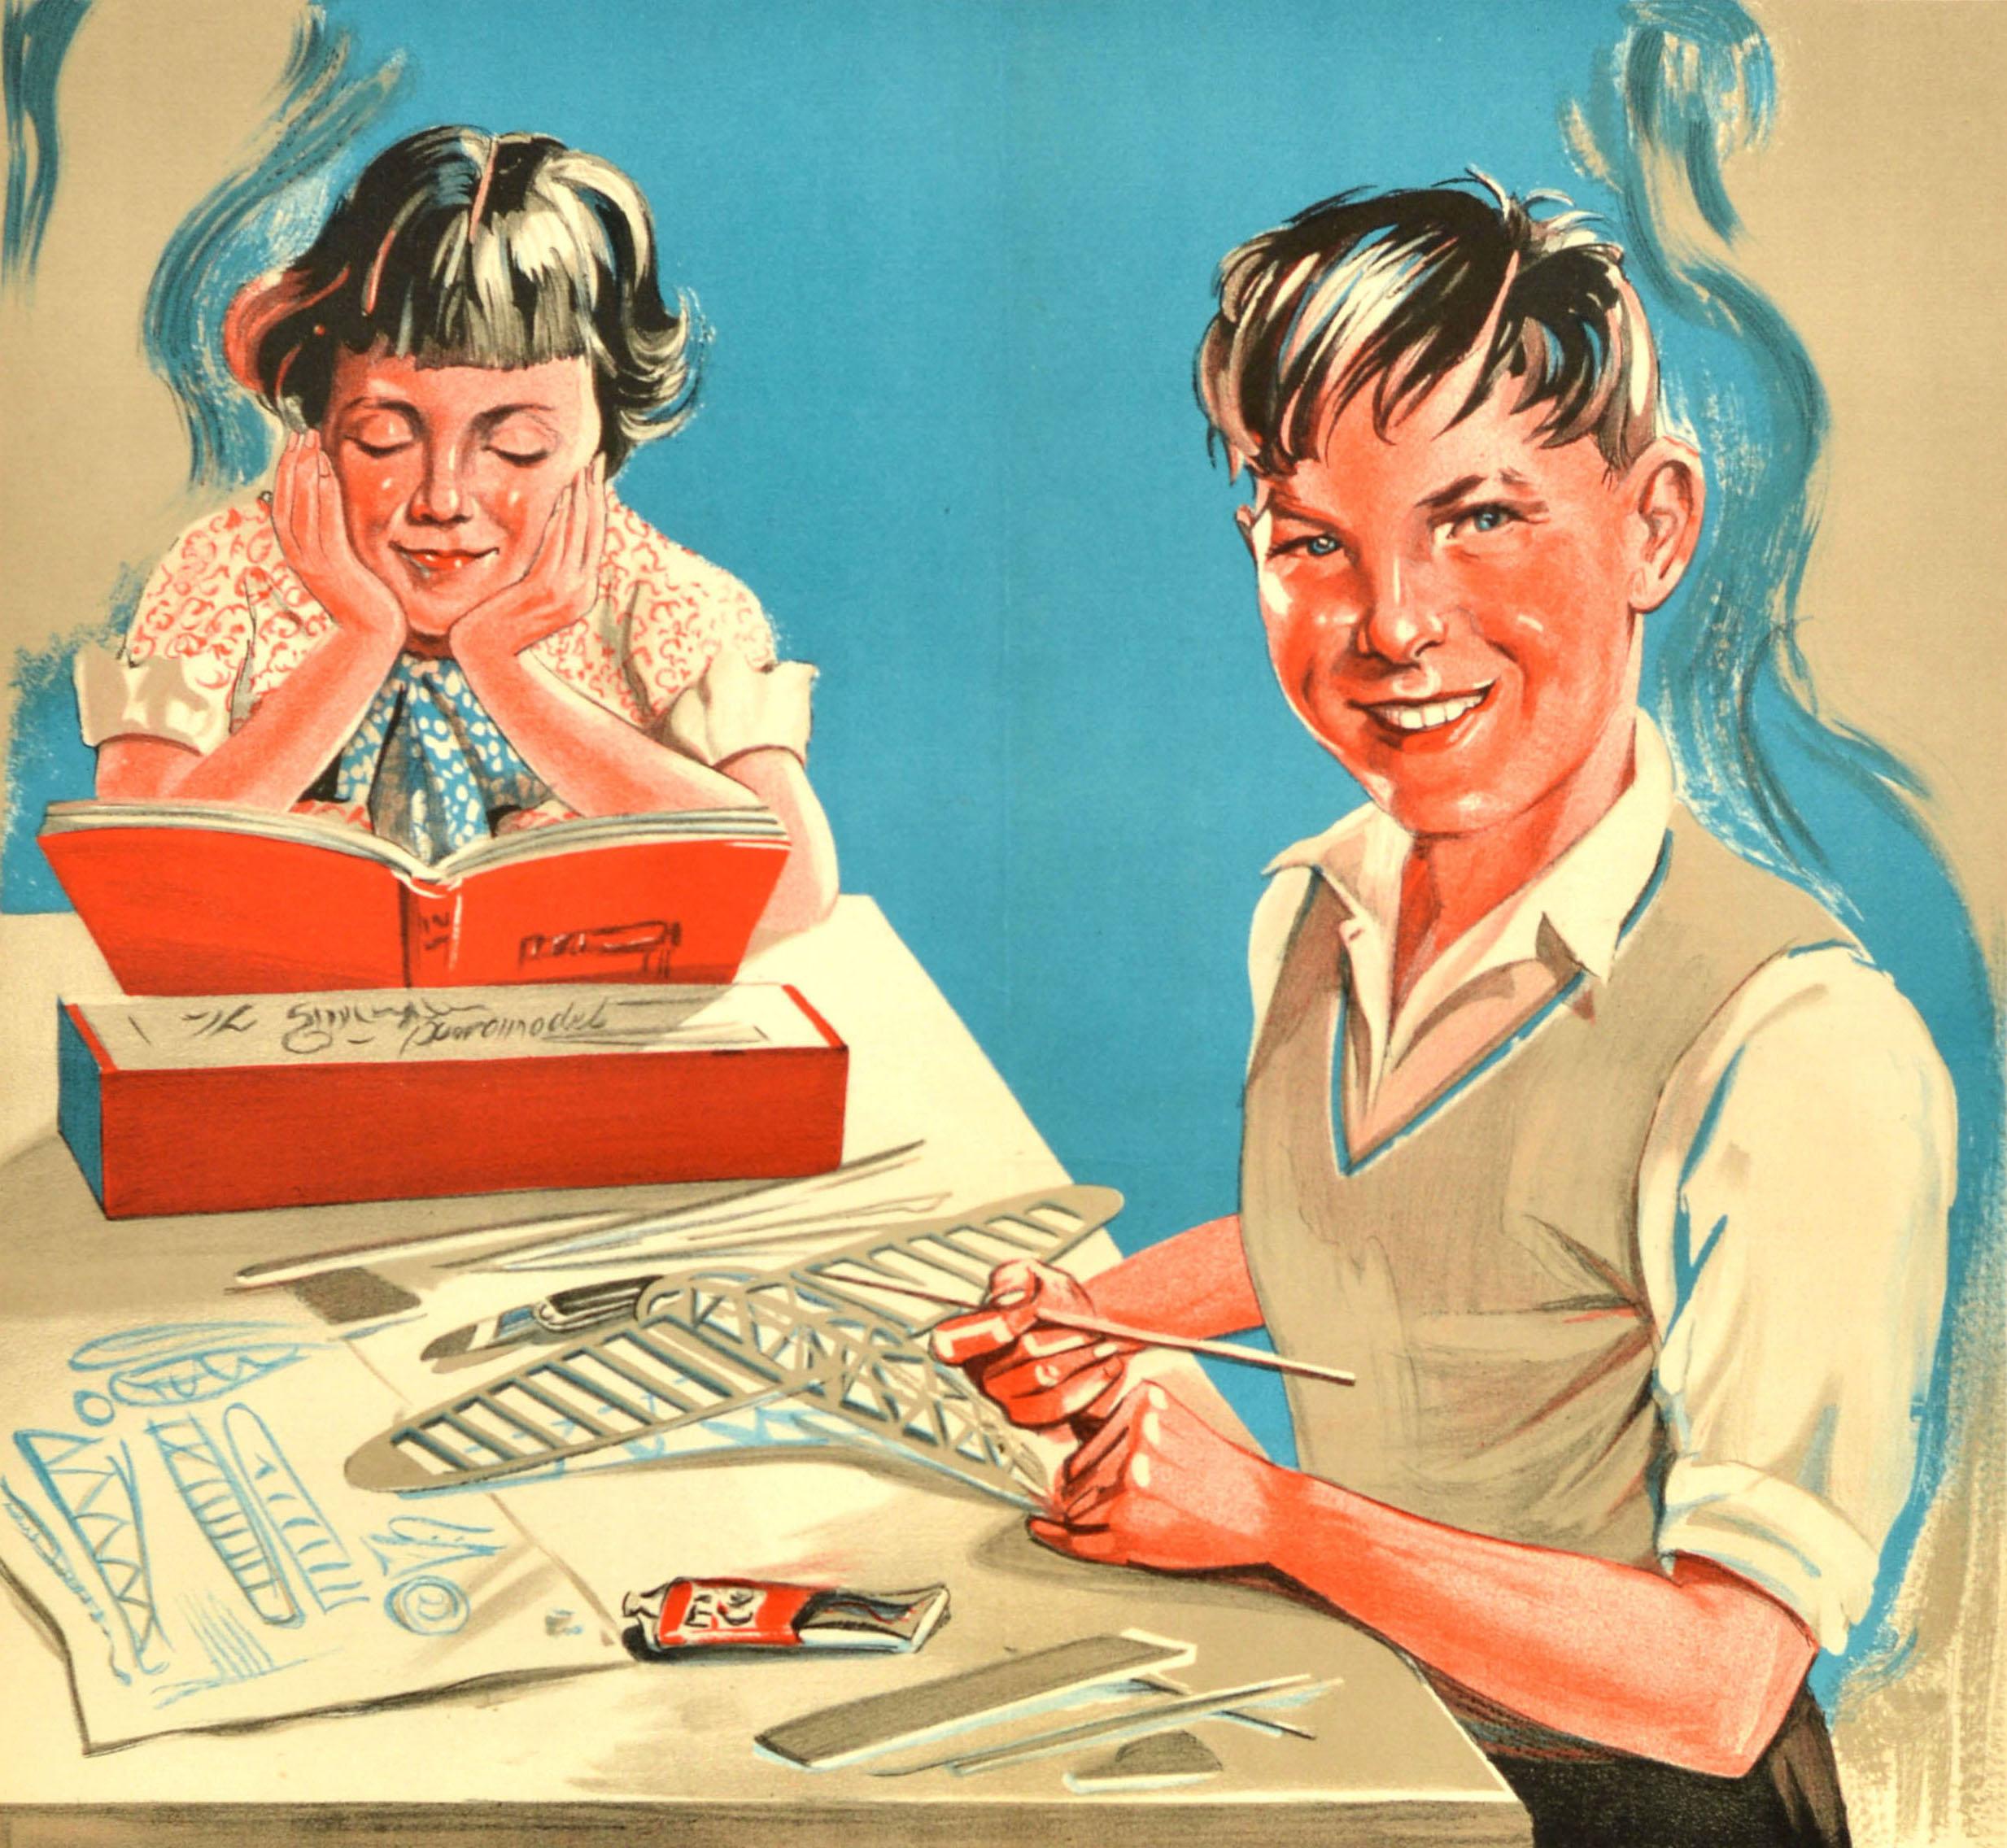 Original vintage London County Council poster - LCC Election Thursday 7 March Give them the best chance in life Vote Conservative - featuring an illustration of a school boy making a model plane and a girl reading a book with the text on the margin